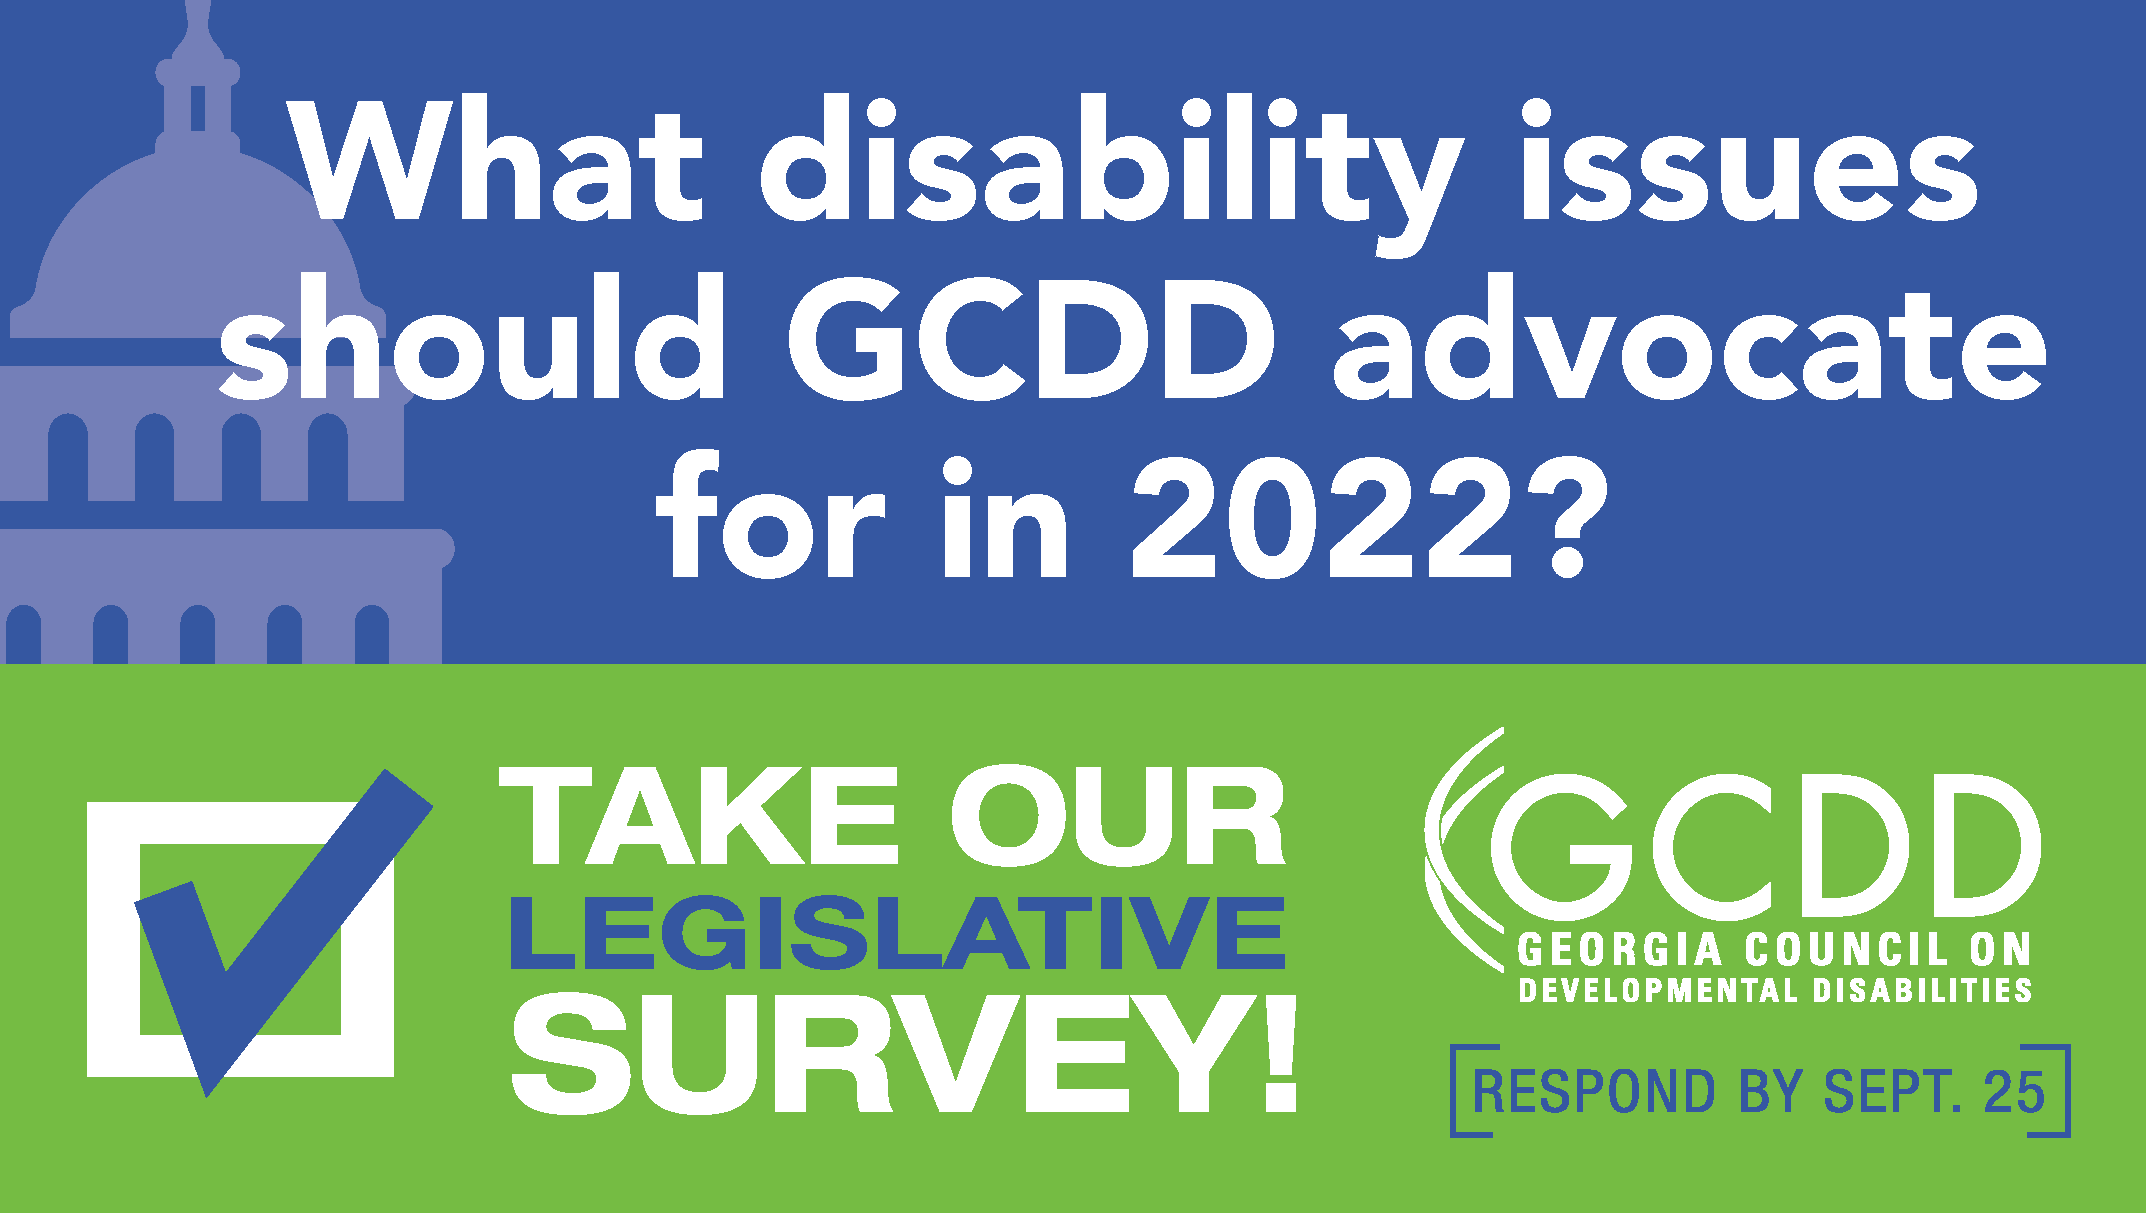 GCDD Legislative Survey graphic - What disability issues should GCDD advocate for in 2022?